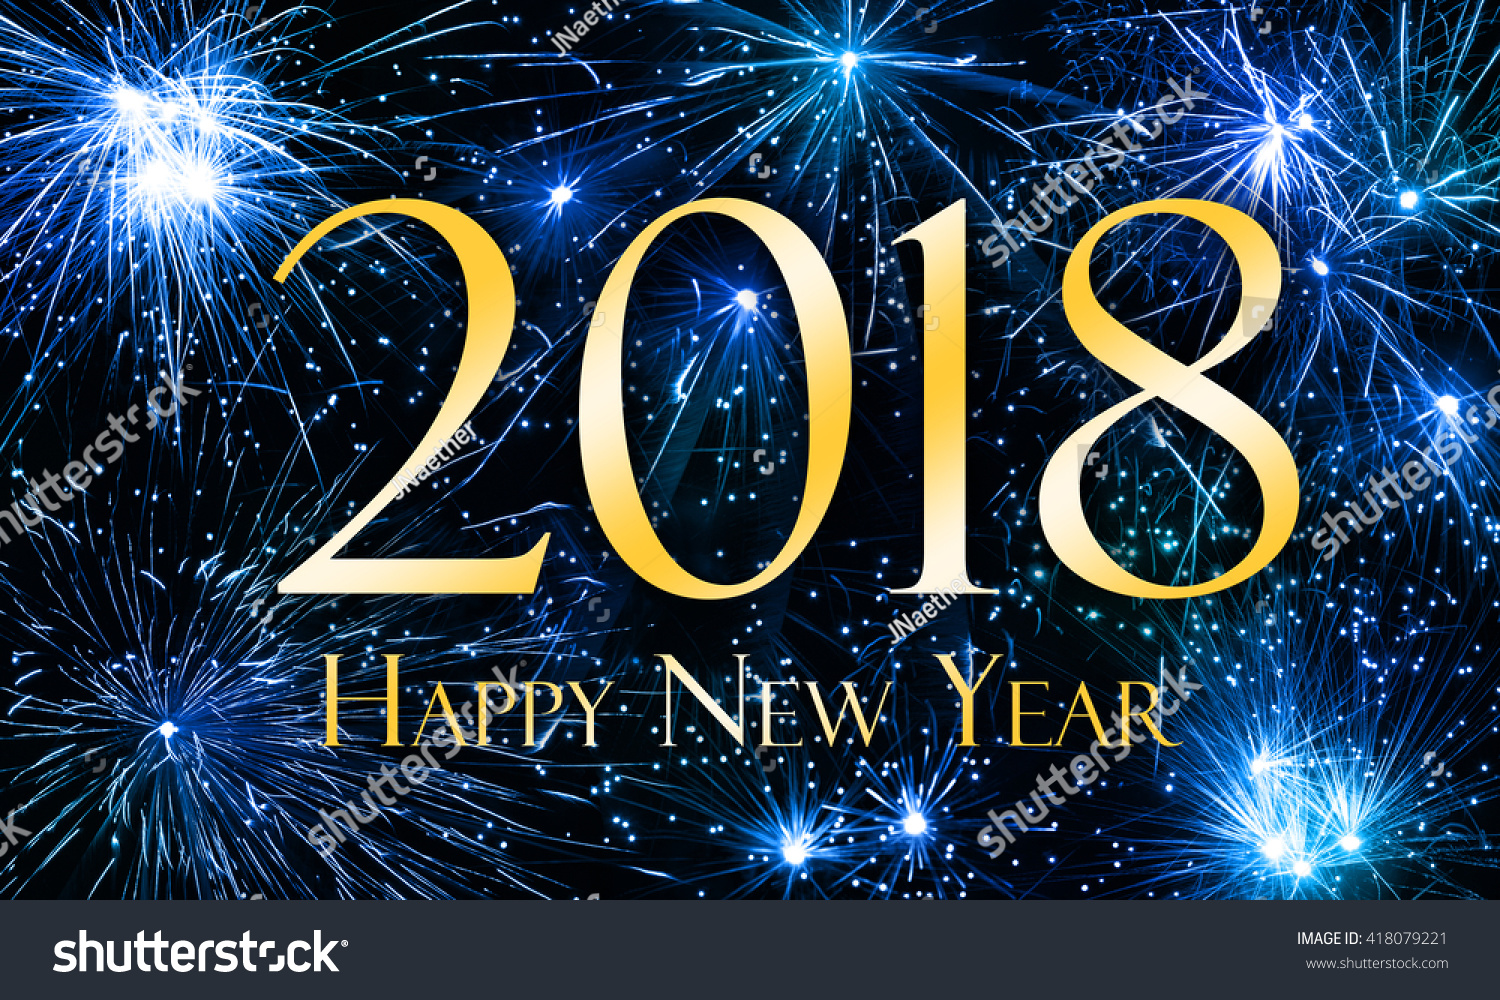 Related Keywords &amp; Suggestions for New Year 2018